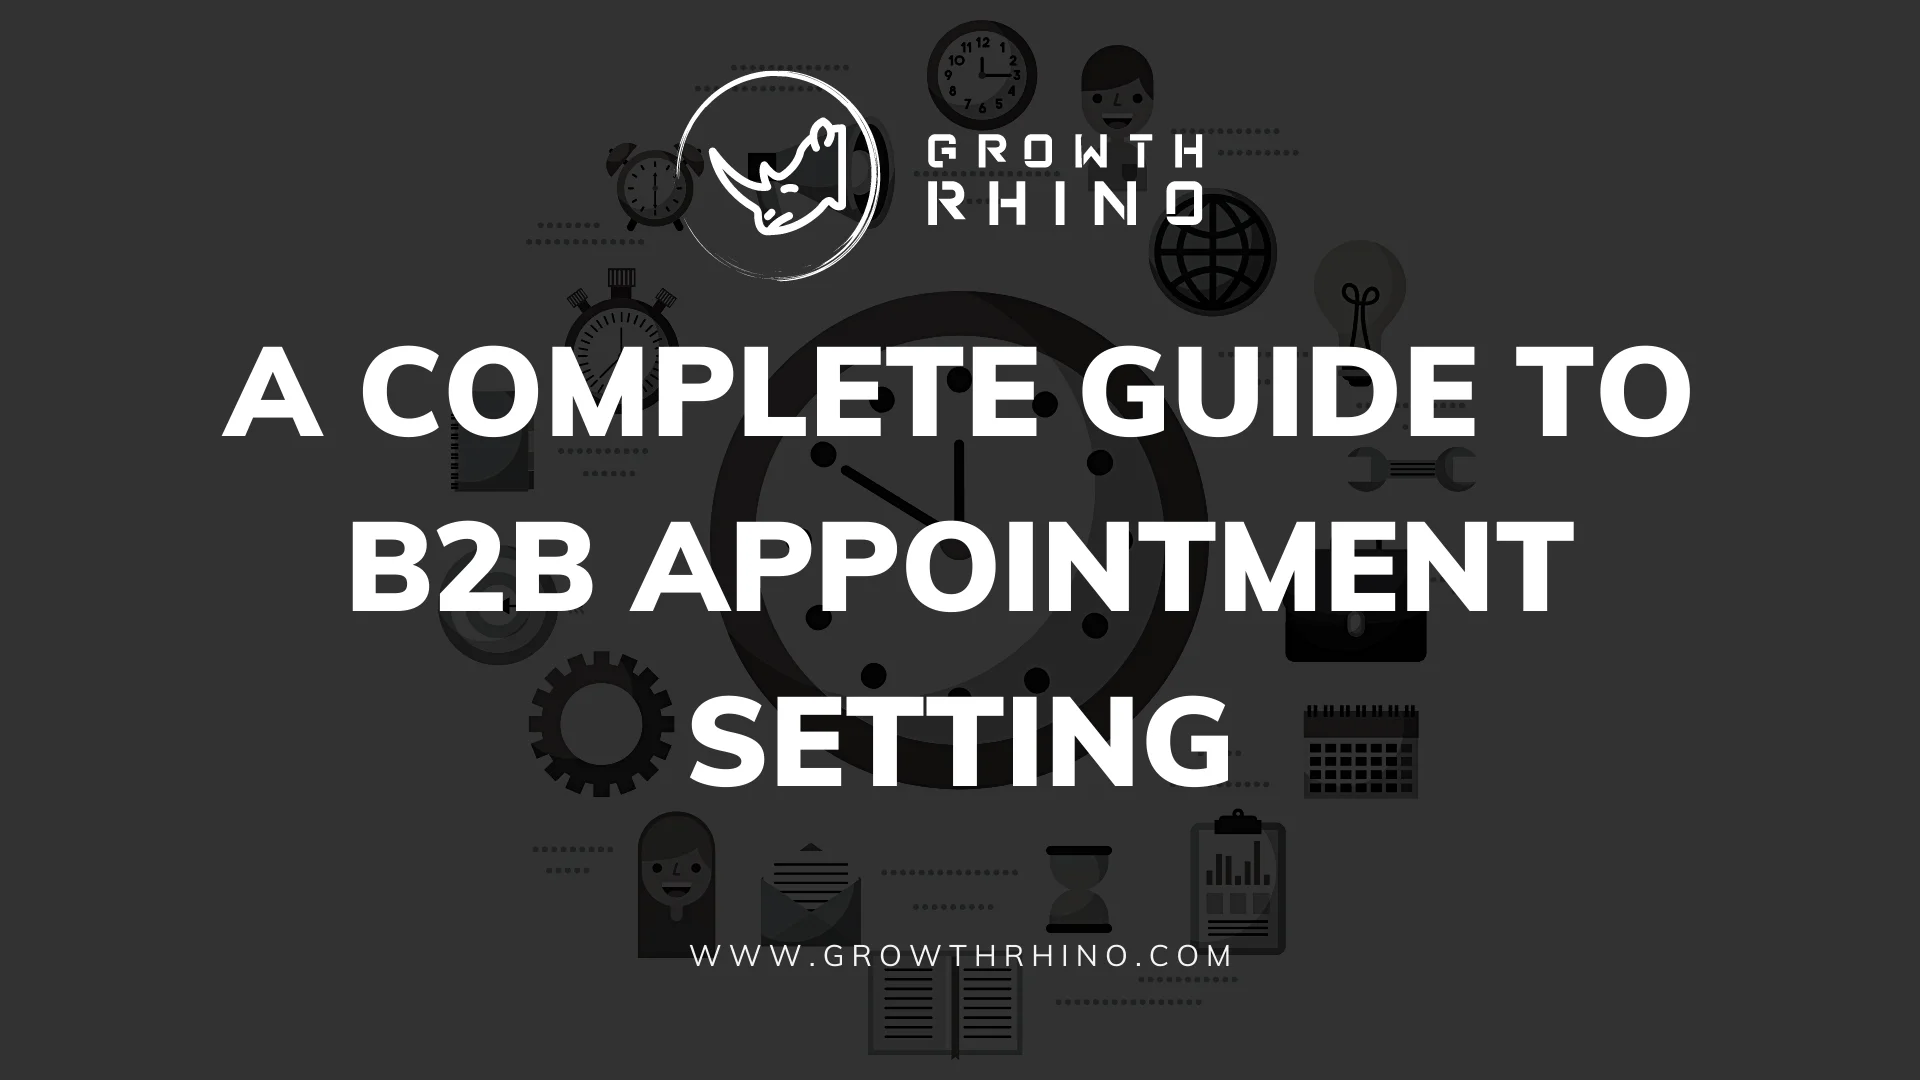 A Complete Guide to B2B Appointment Setting